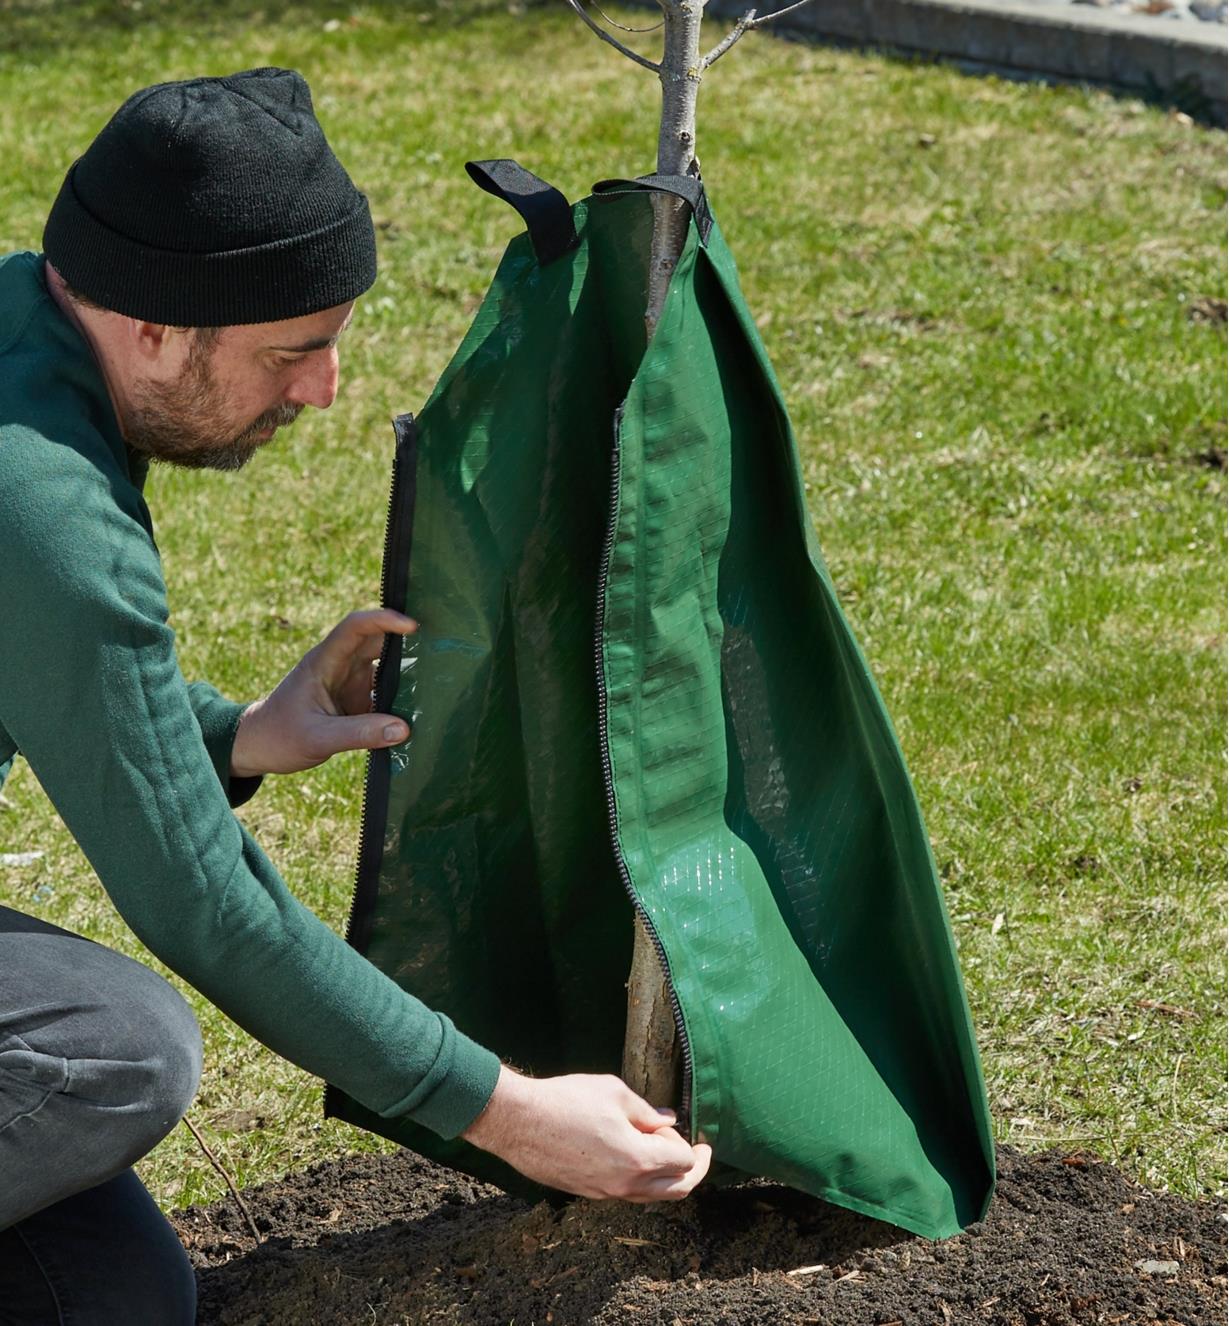 Wrapping a 20 gallon PVC tree watering bag around a tree base